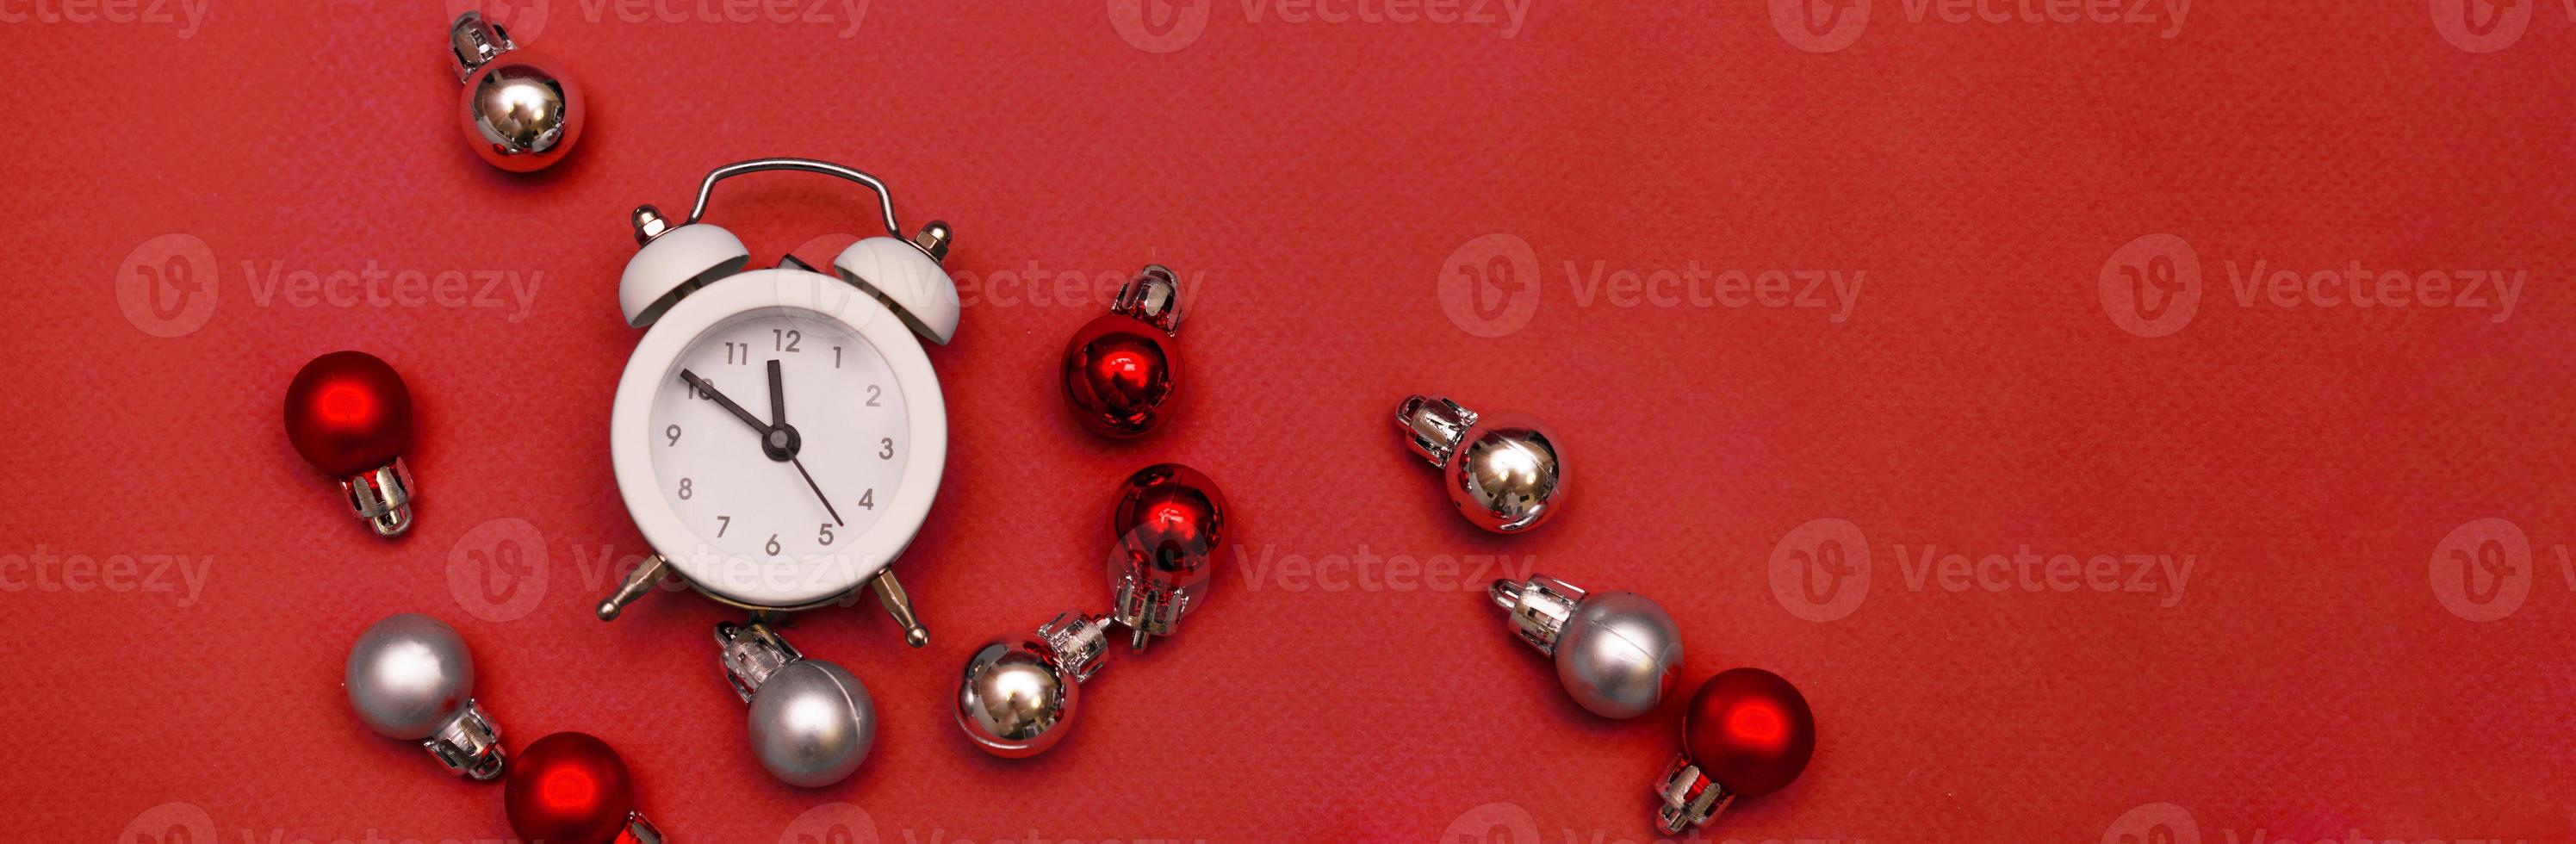 White alarm clock on red background with christmas balls photo